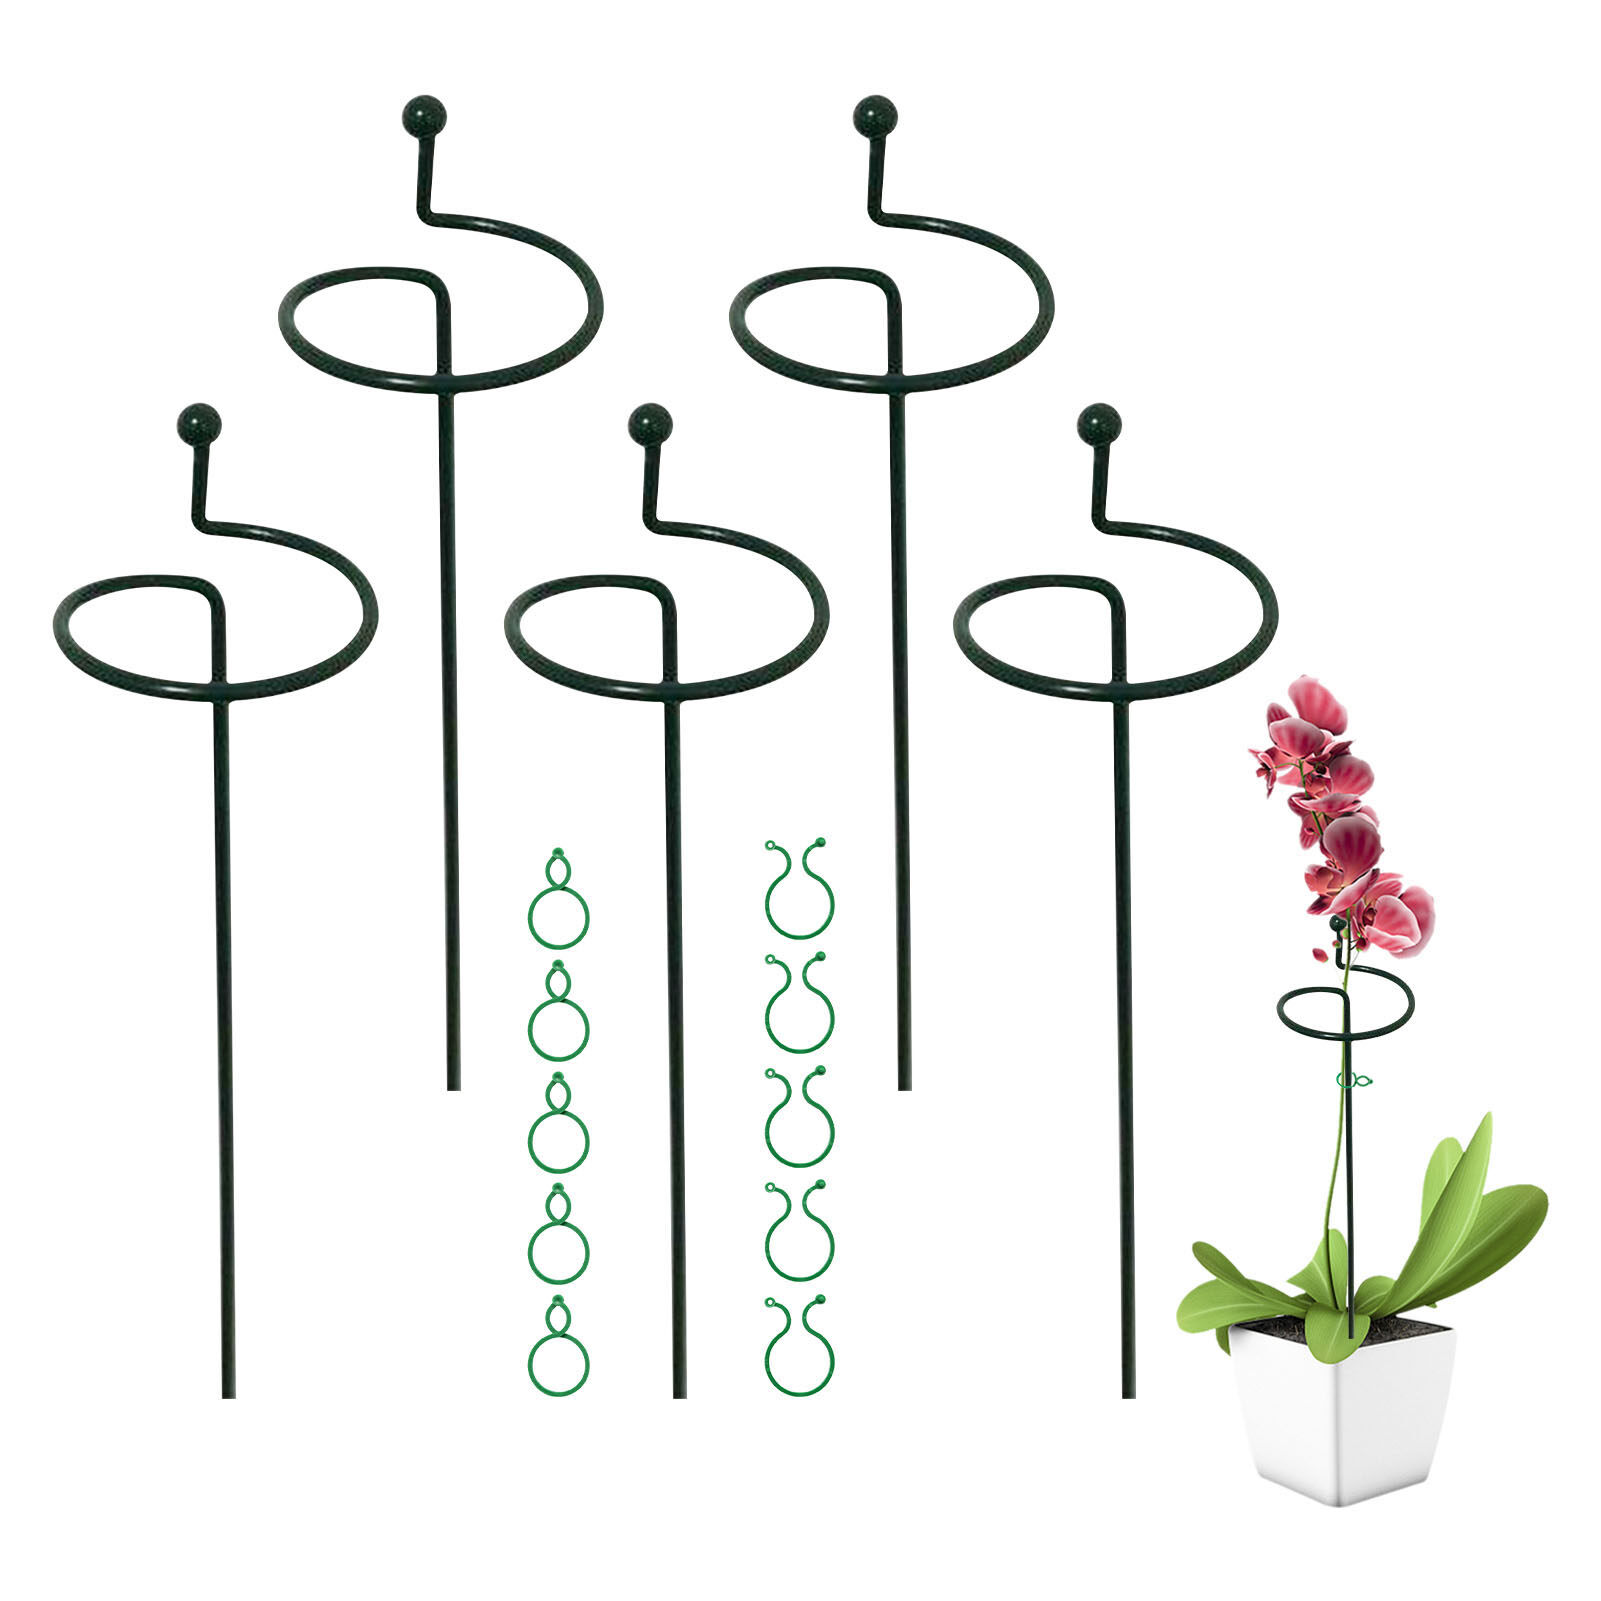 Plant Stem Support,10Pcs Plant Support Stakes,Plant Cage Support Ring with 10 pcs Plant Clips,Single Plant Stem Flower Support for Flowers Tomatoes Peony Lily Rose 40cm/15.7inch Long 